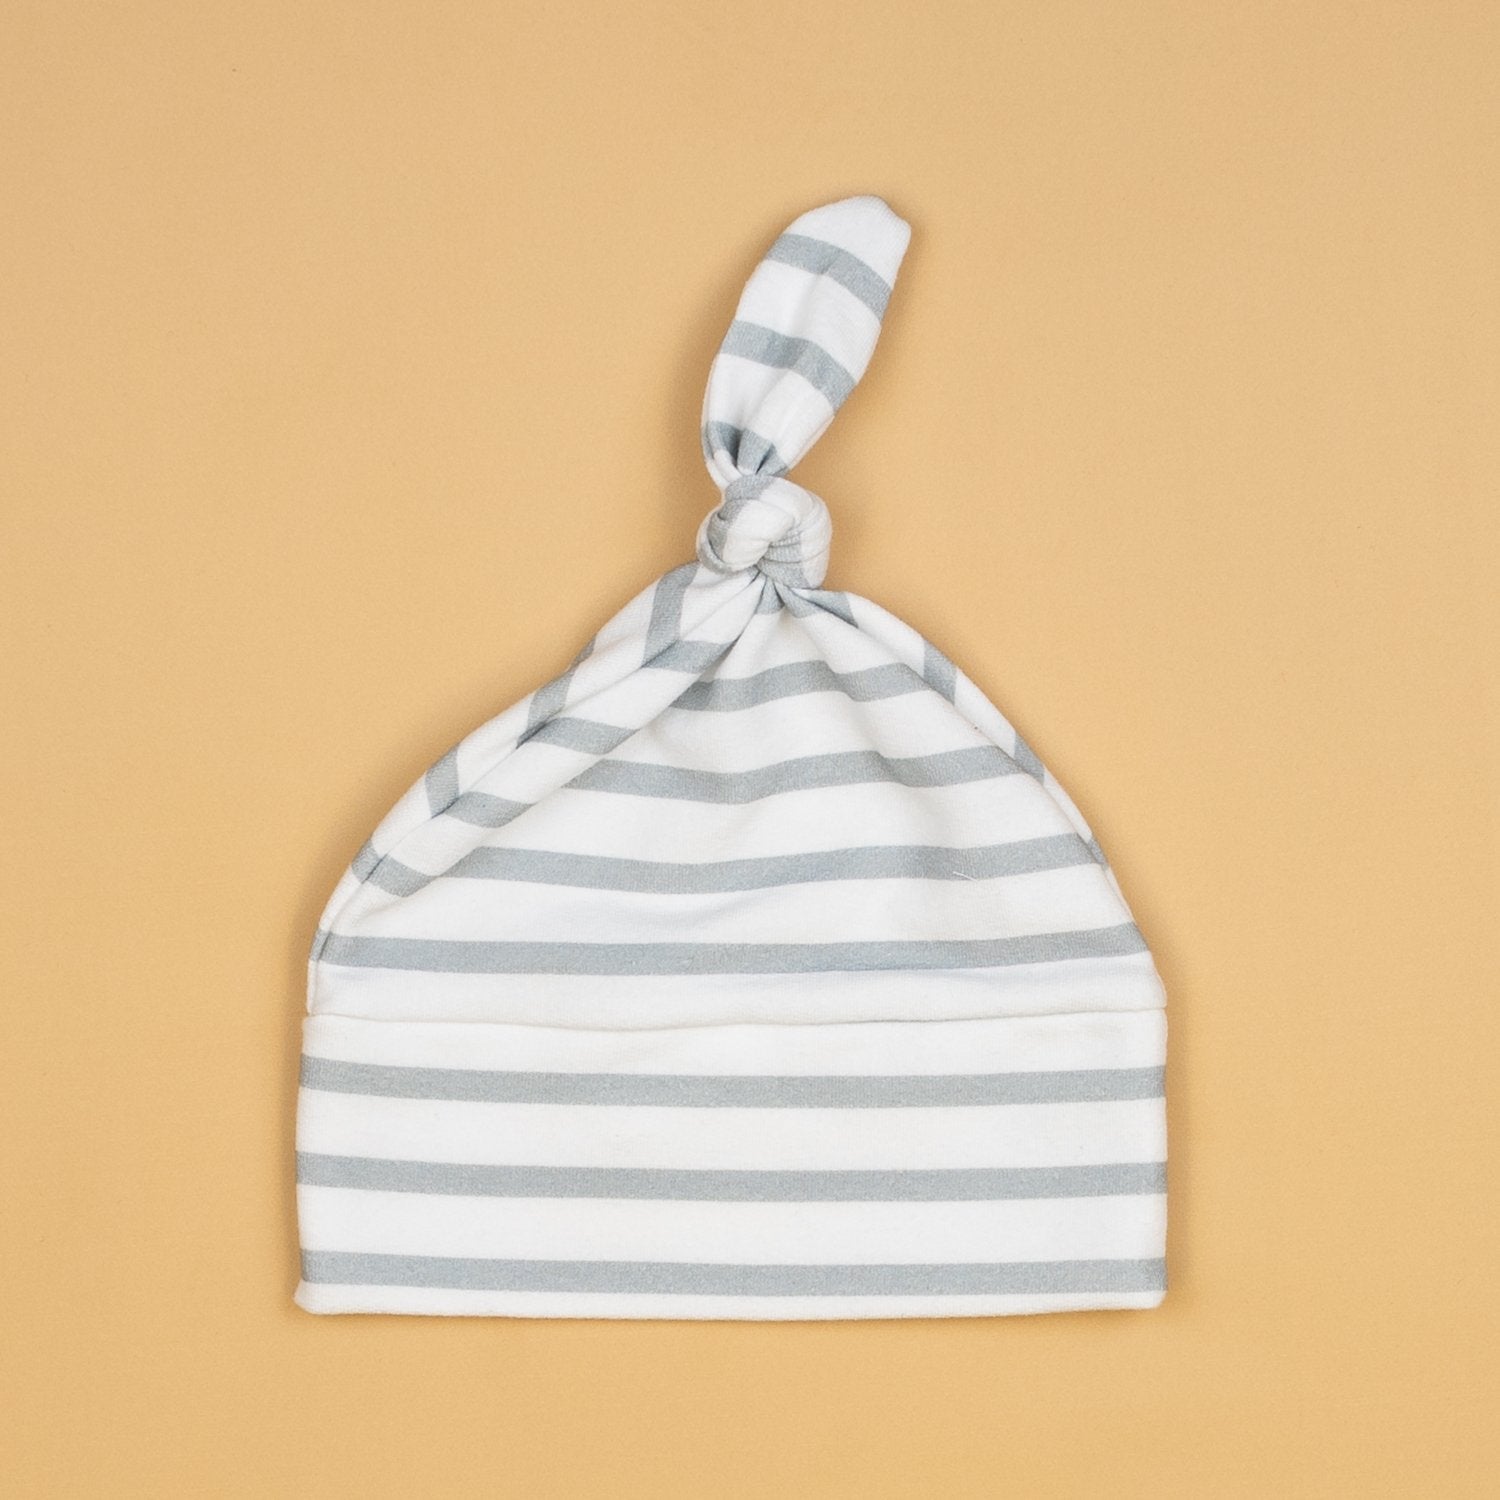 Cuddle Sleep Dream Knot Hat Small (0-3m) Gray/White Stripe French Terry Knot Hat